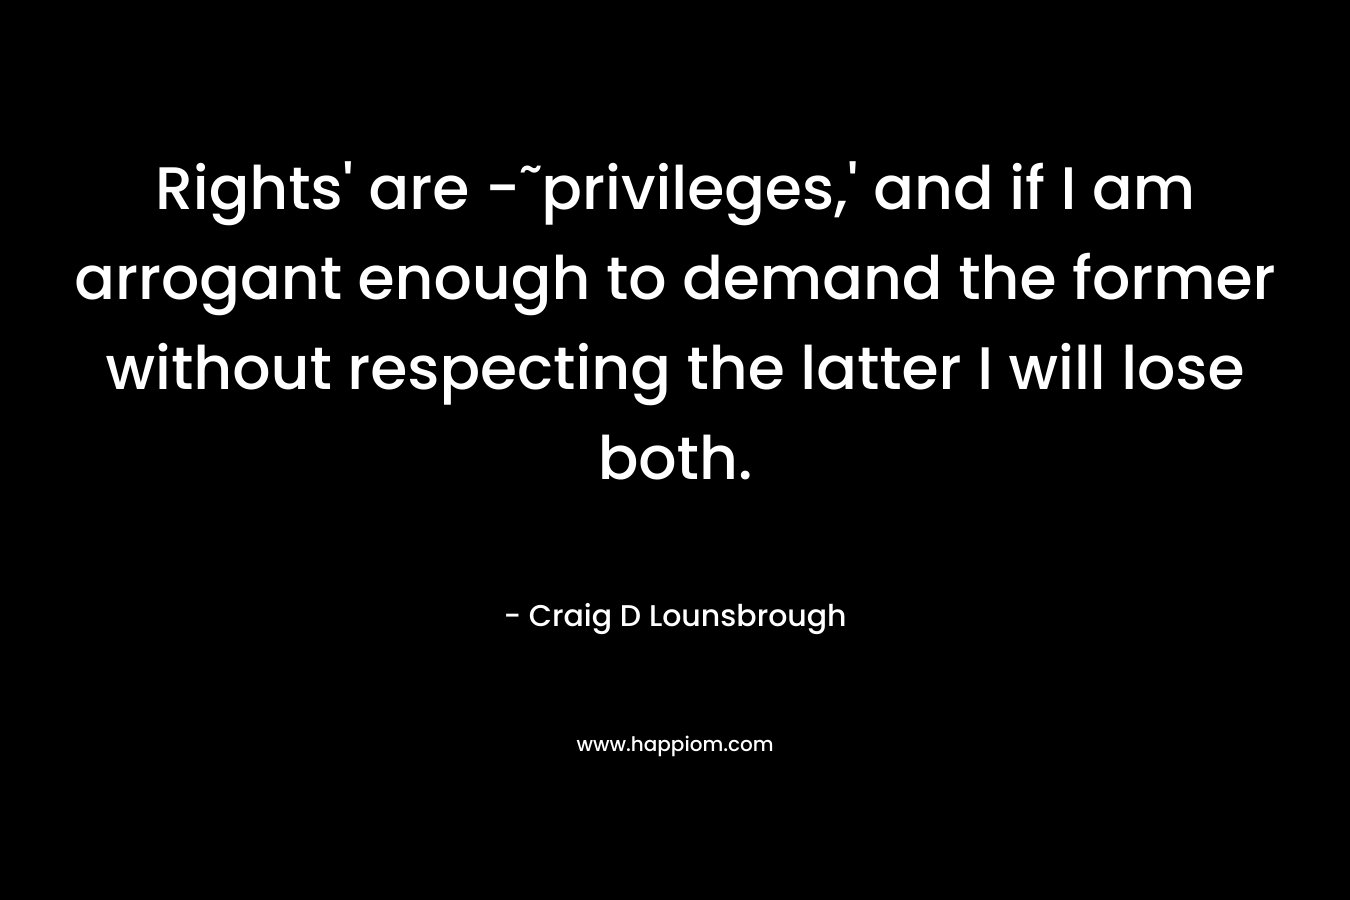 Rights' are -˜privileges,' and if I am arrogant enough to demand the former without respecting the latter I will lose both.